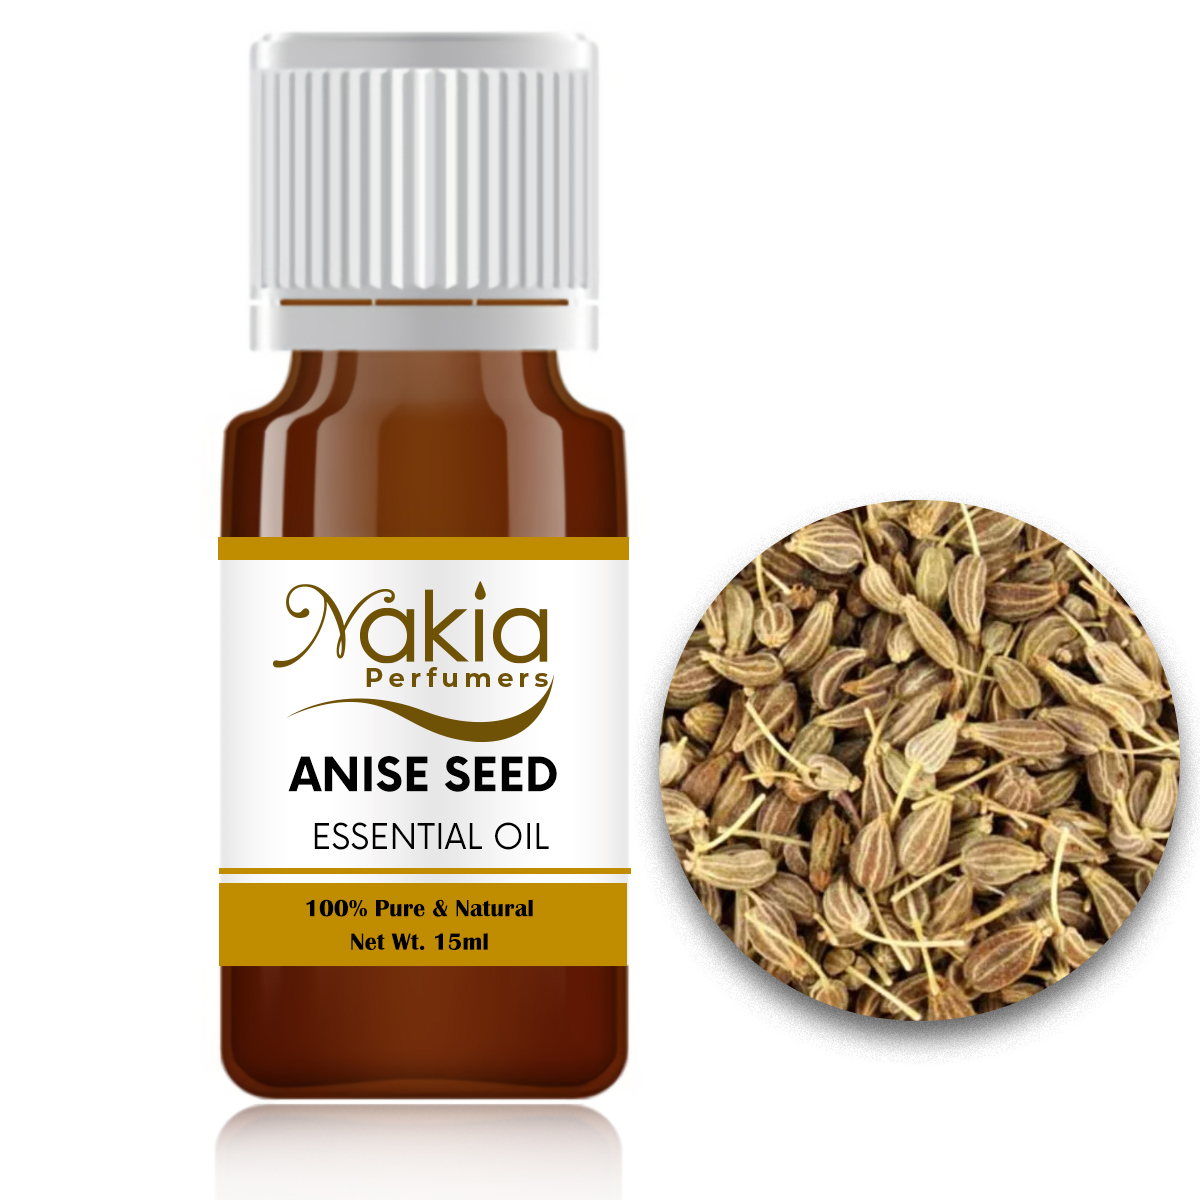 ANISE SEED ESSENTIAL OIL